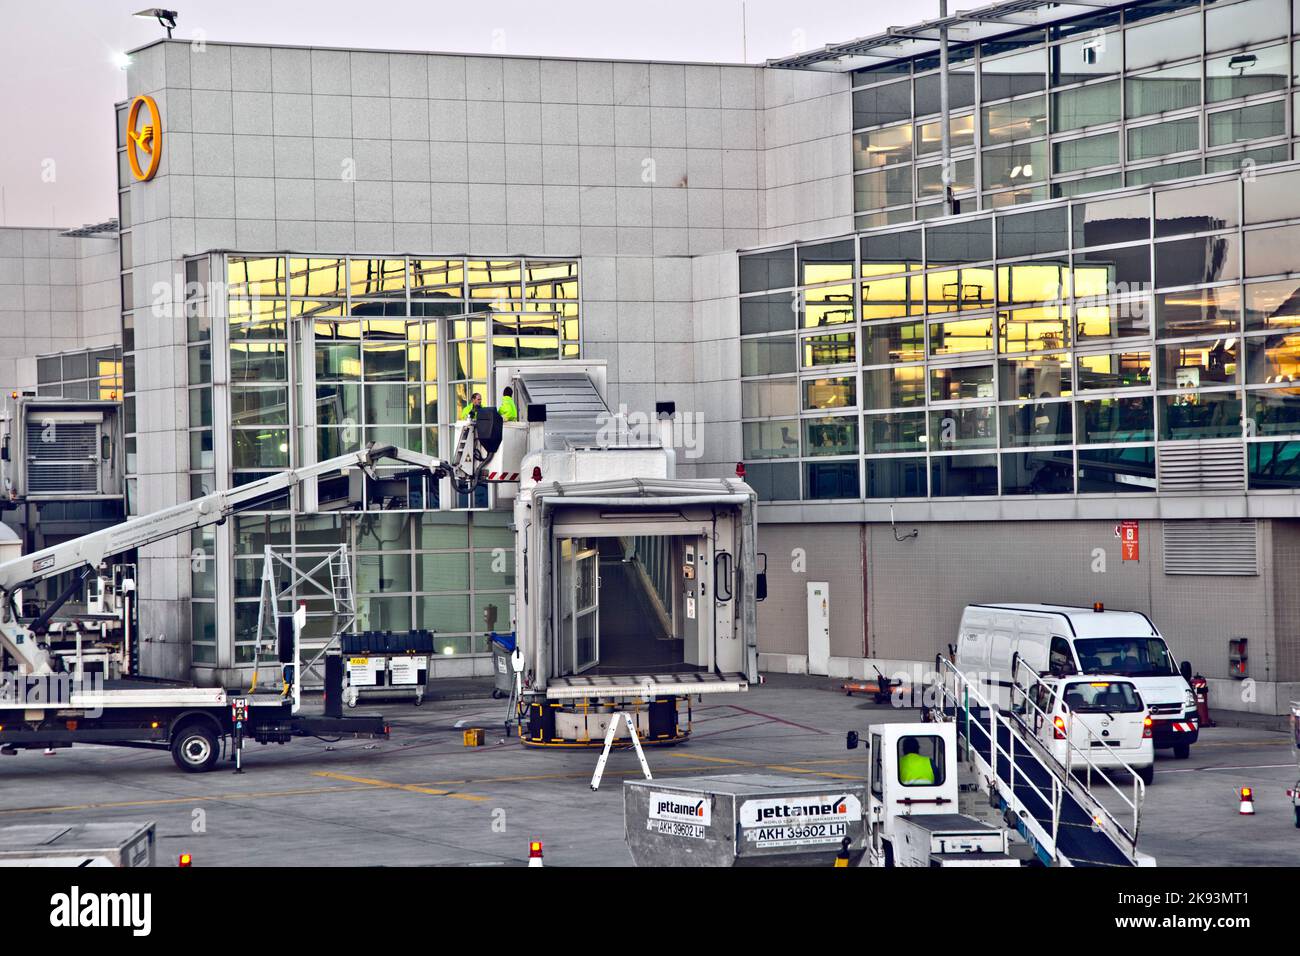 Hamburg, Germany - October 26, 2011: Arriving with Lufthansa in A-Finger  Terminal 1 in Frankfurt, Germany. The A-Finger was inaugurated 2010 and offe Stock Photo